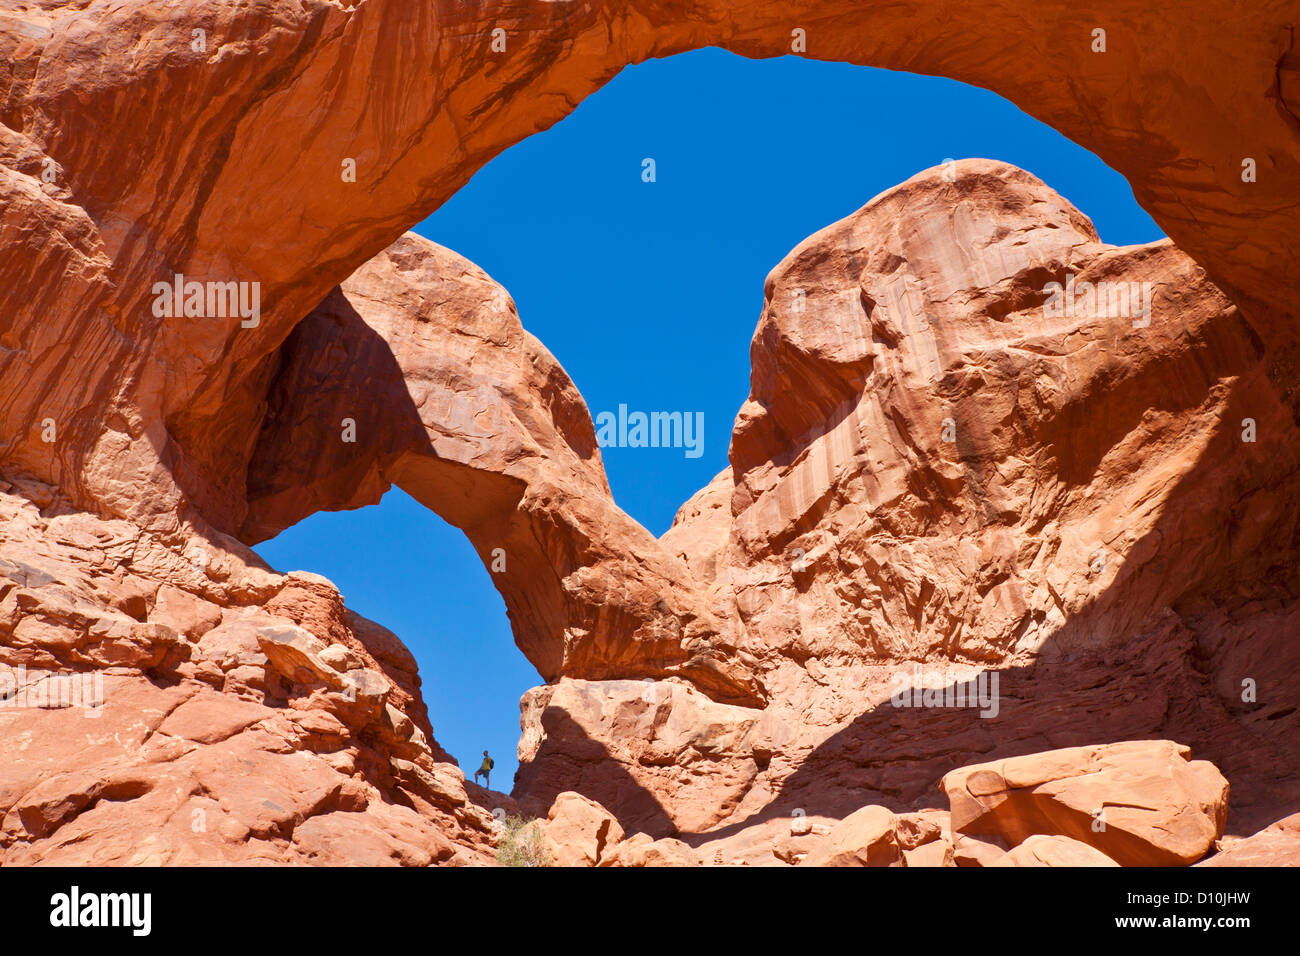 Hiker stood in the archway at Double Arch Arches national park, near Moab, Utah United States of America, USA Stock Photo